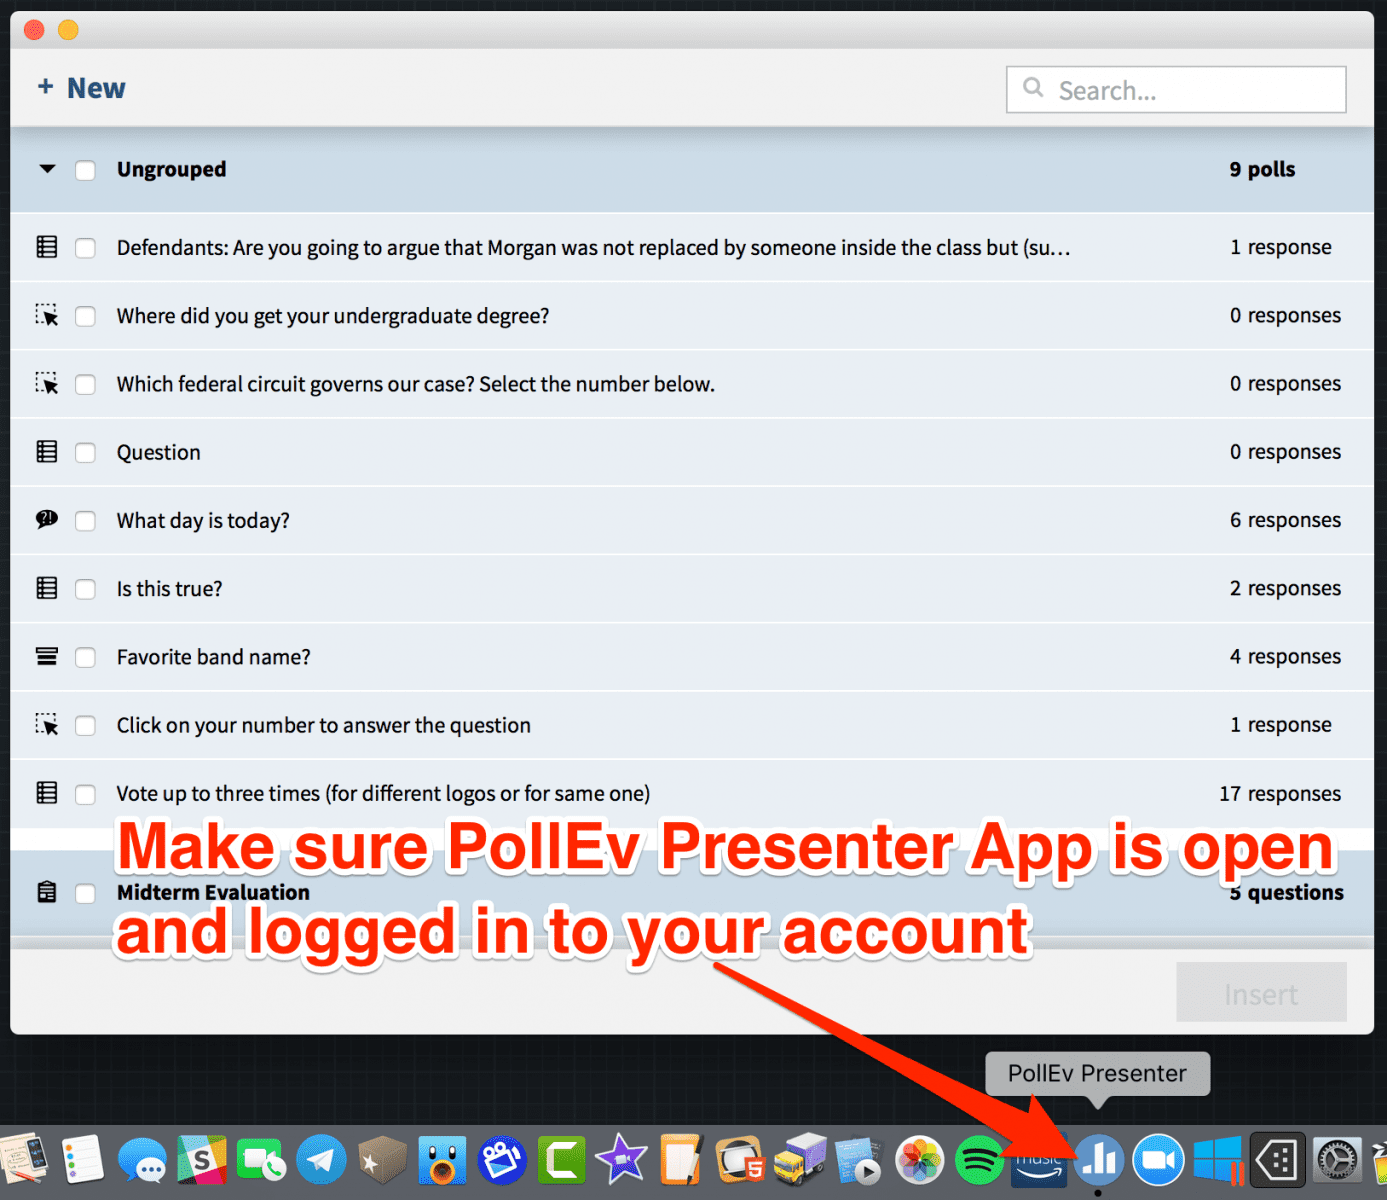 Make sure PollEv Presenter App is open and logged into your account. Arrow shows app on menu bar.